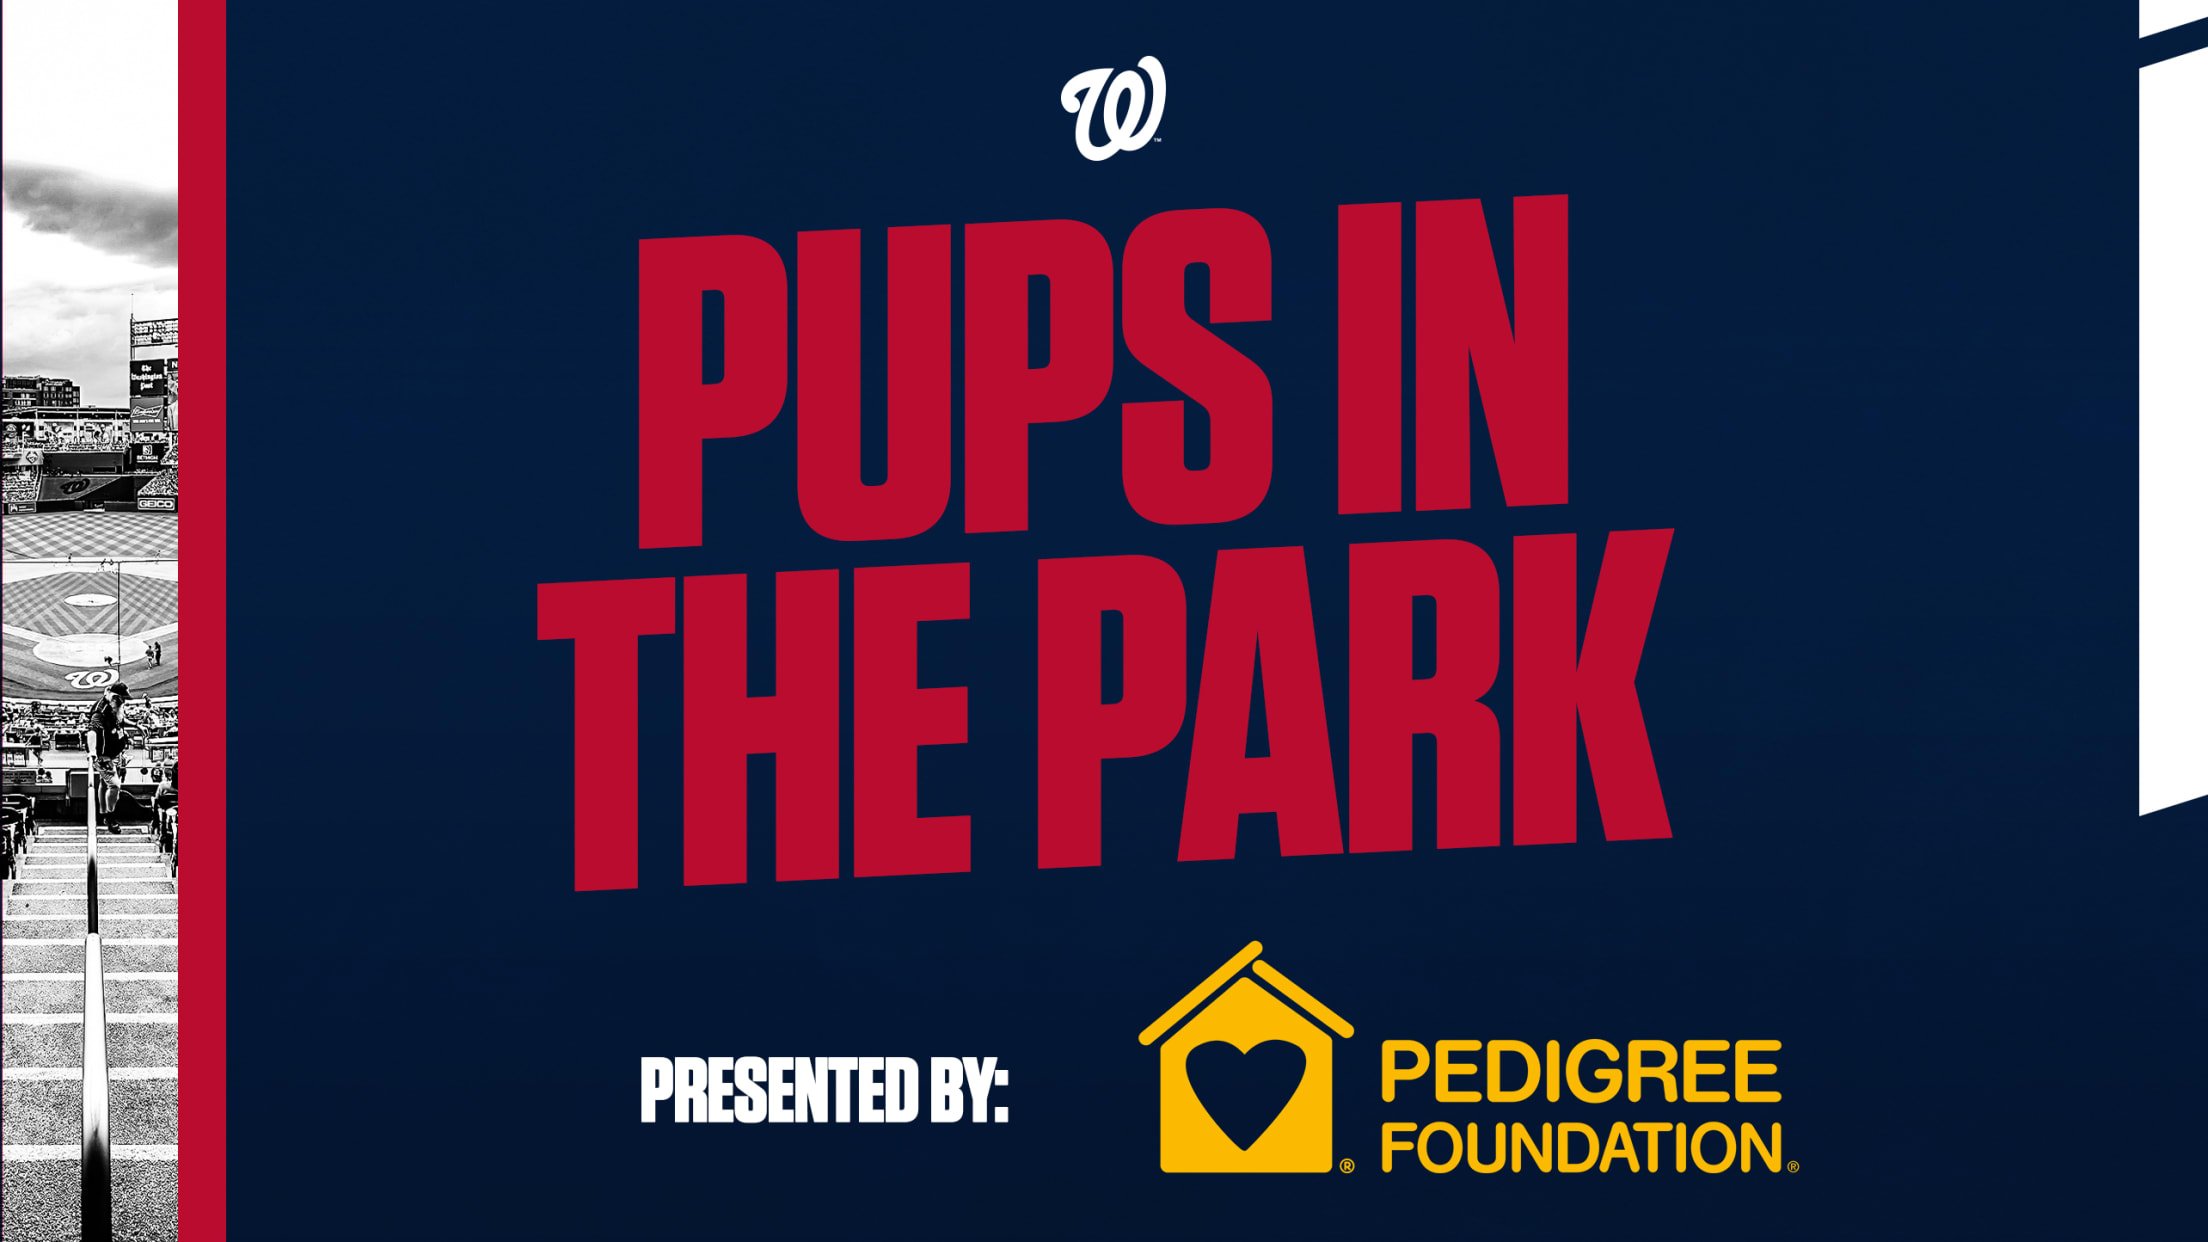 Pups in the Park presented by PEDIGREE Foundation